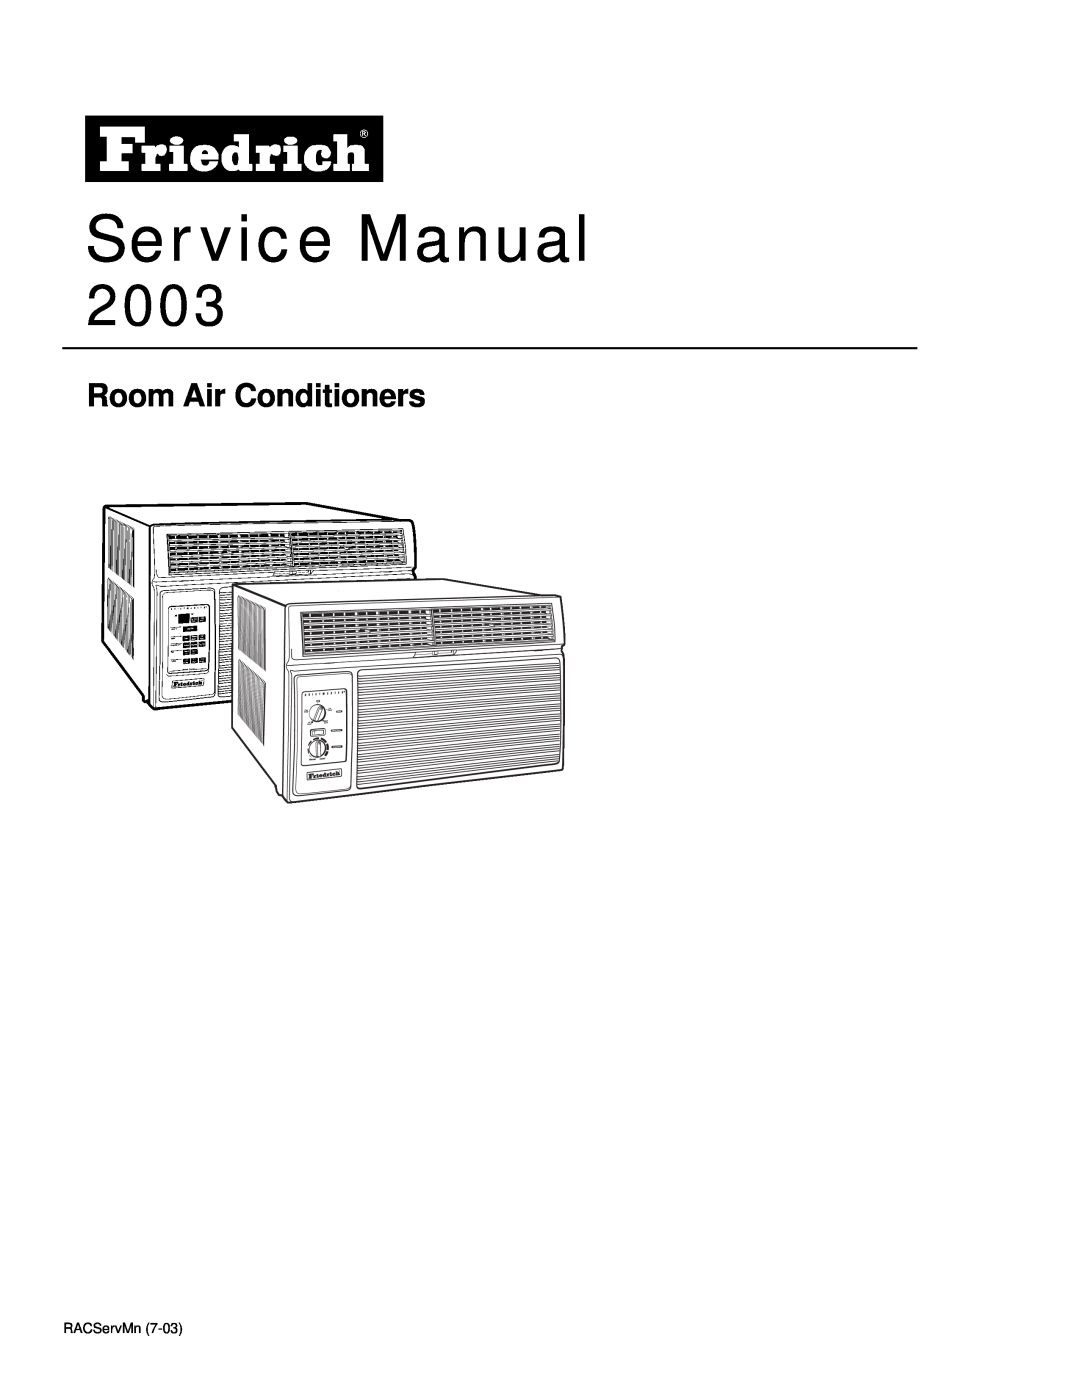 Friedrich 2003 service manual Room Air Conditioners 